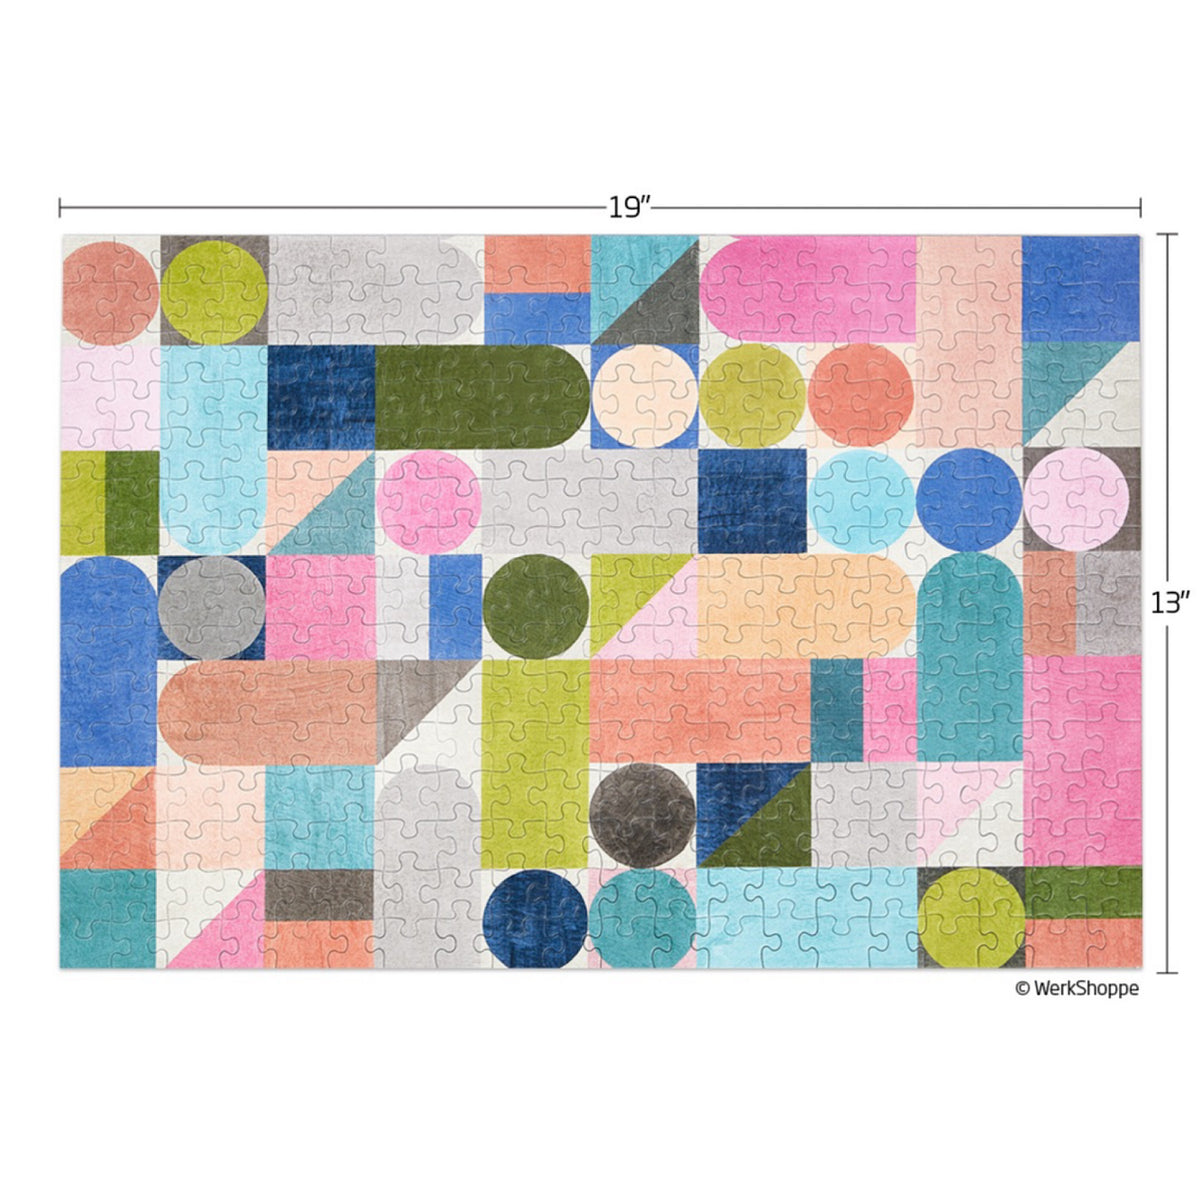 Abstract Geometric 300 Piece Jigsaw Puzzle